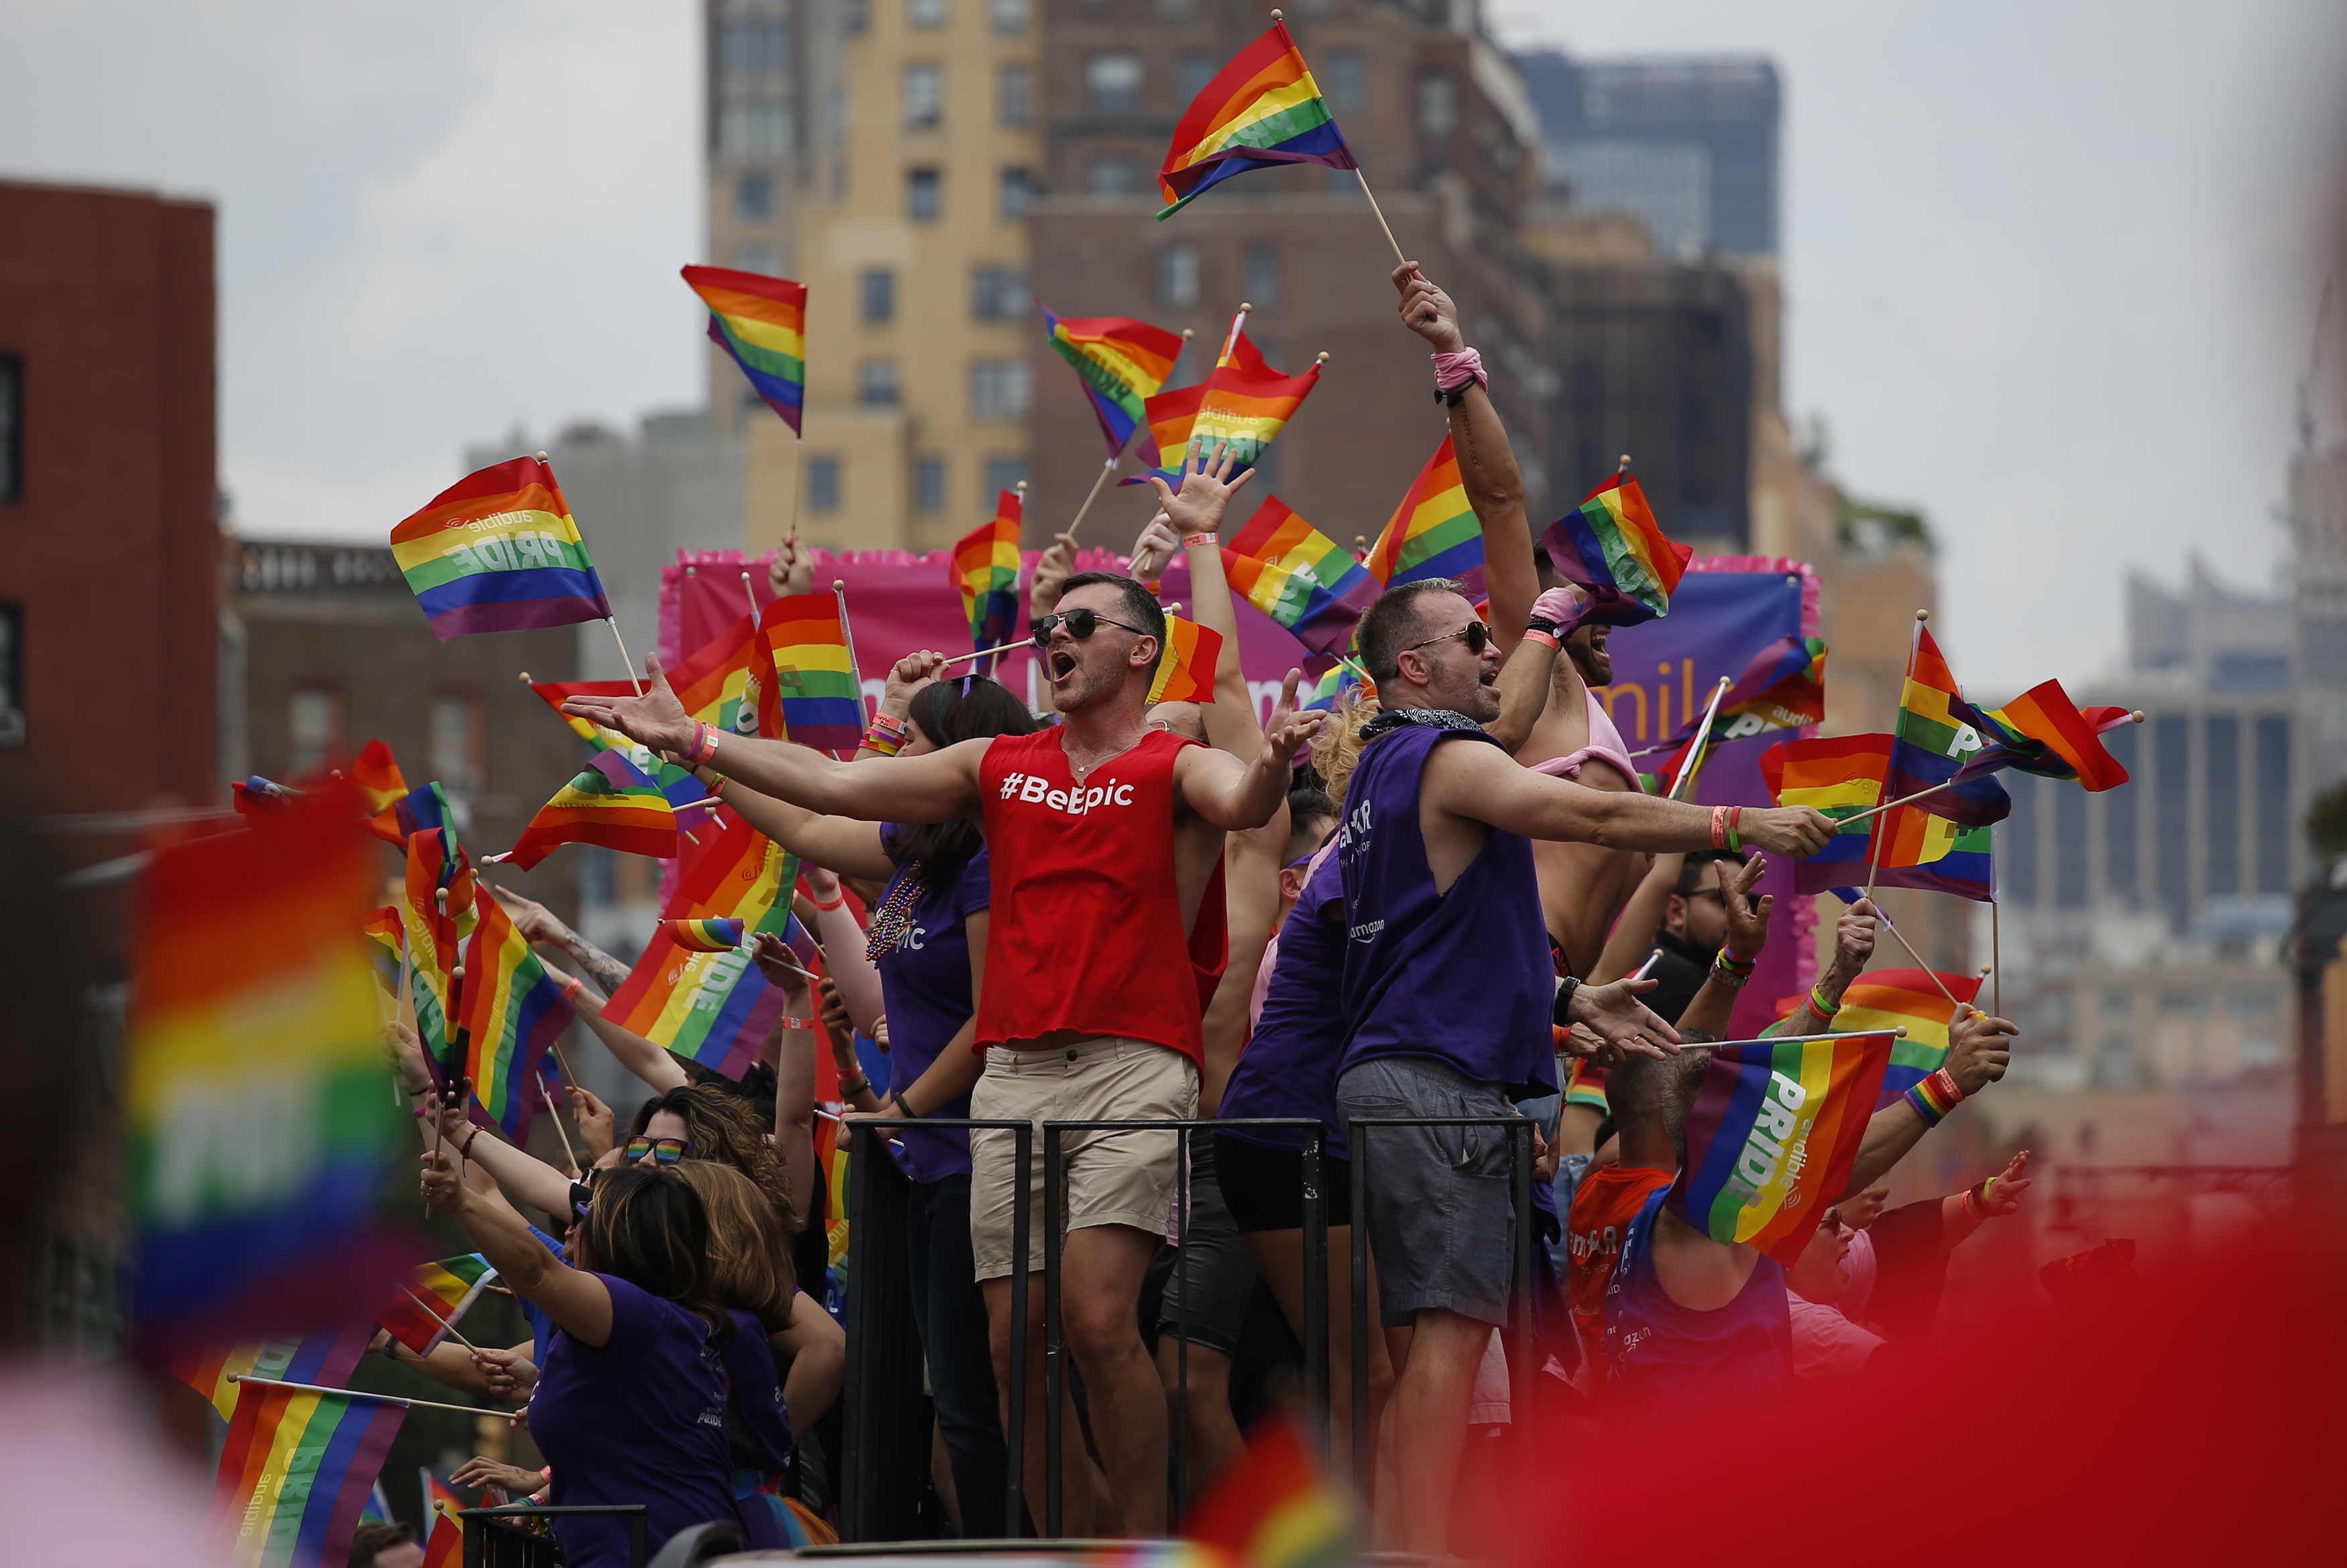 when is the gay pride parade in nyc 2018